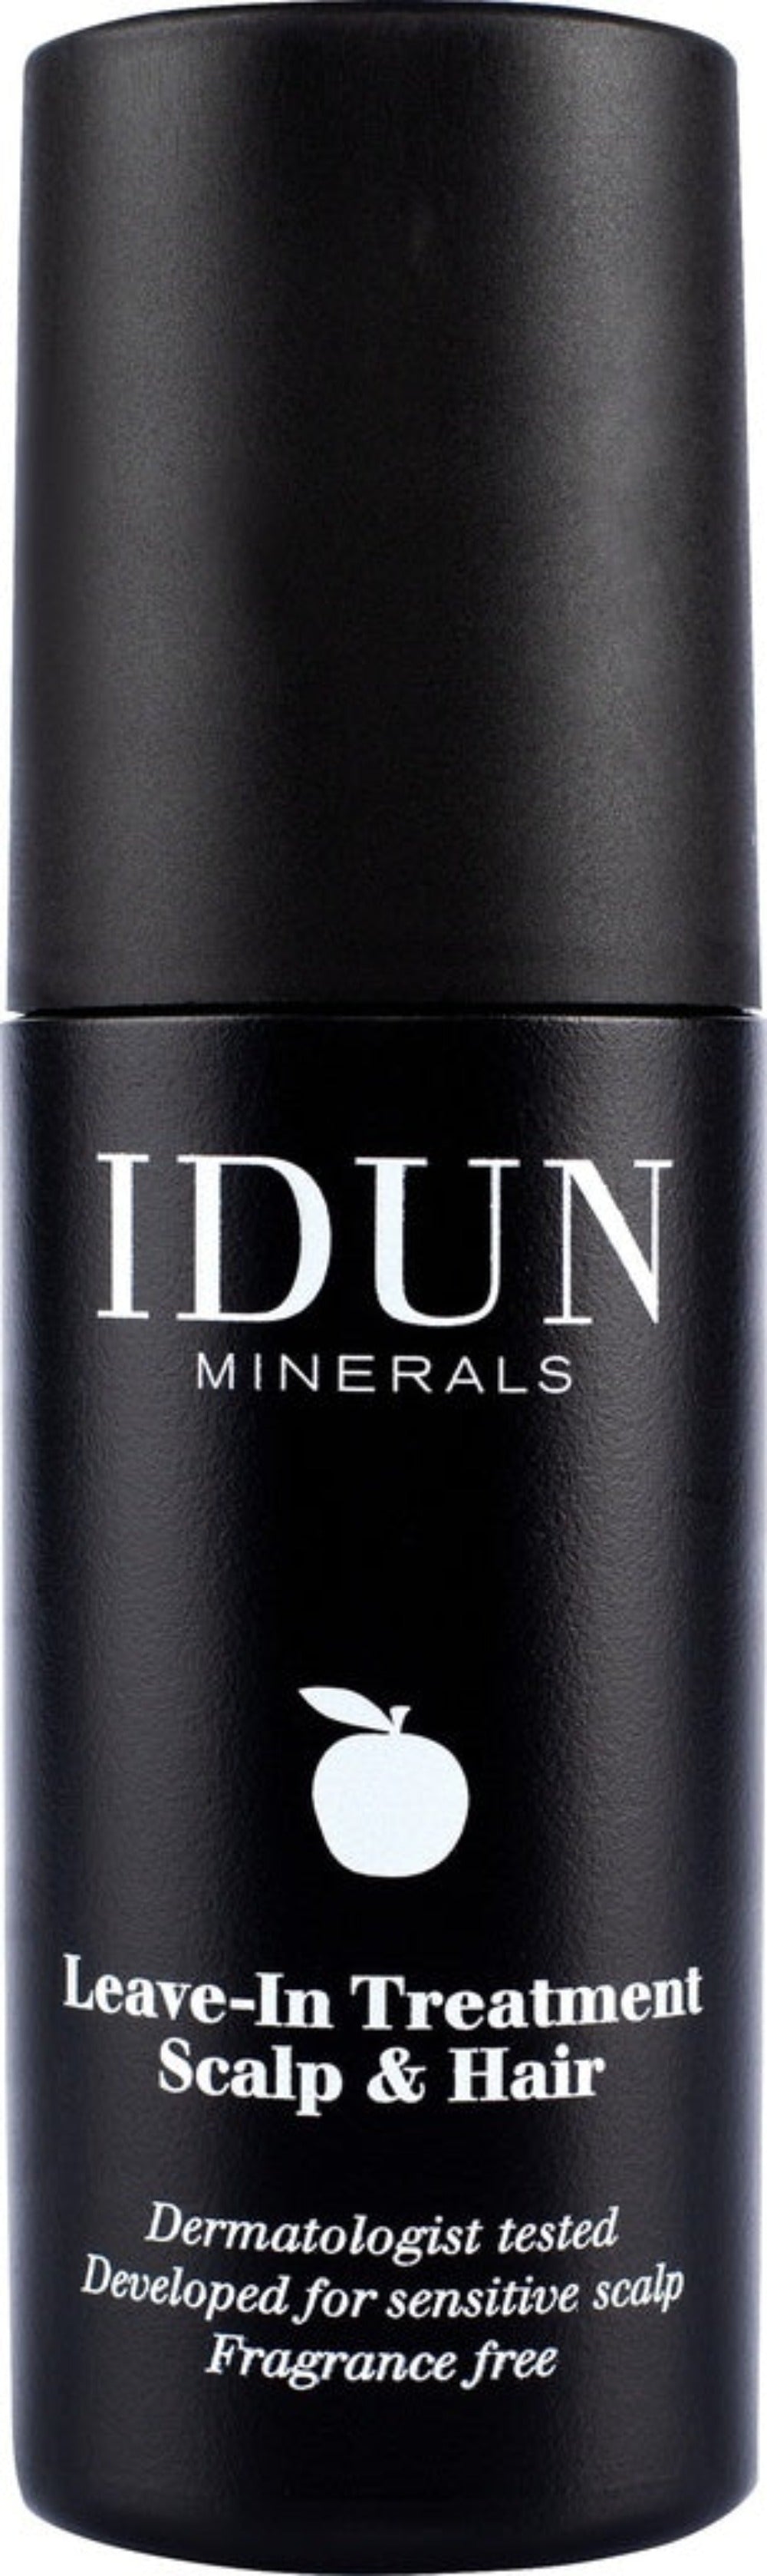 IDUN MINERALS - Leave-In Treatment Scalp and Hair 100 ml